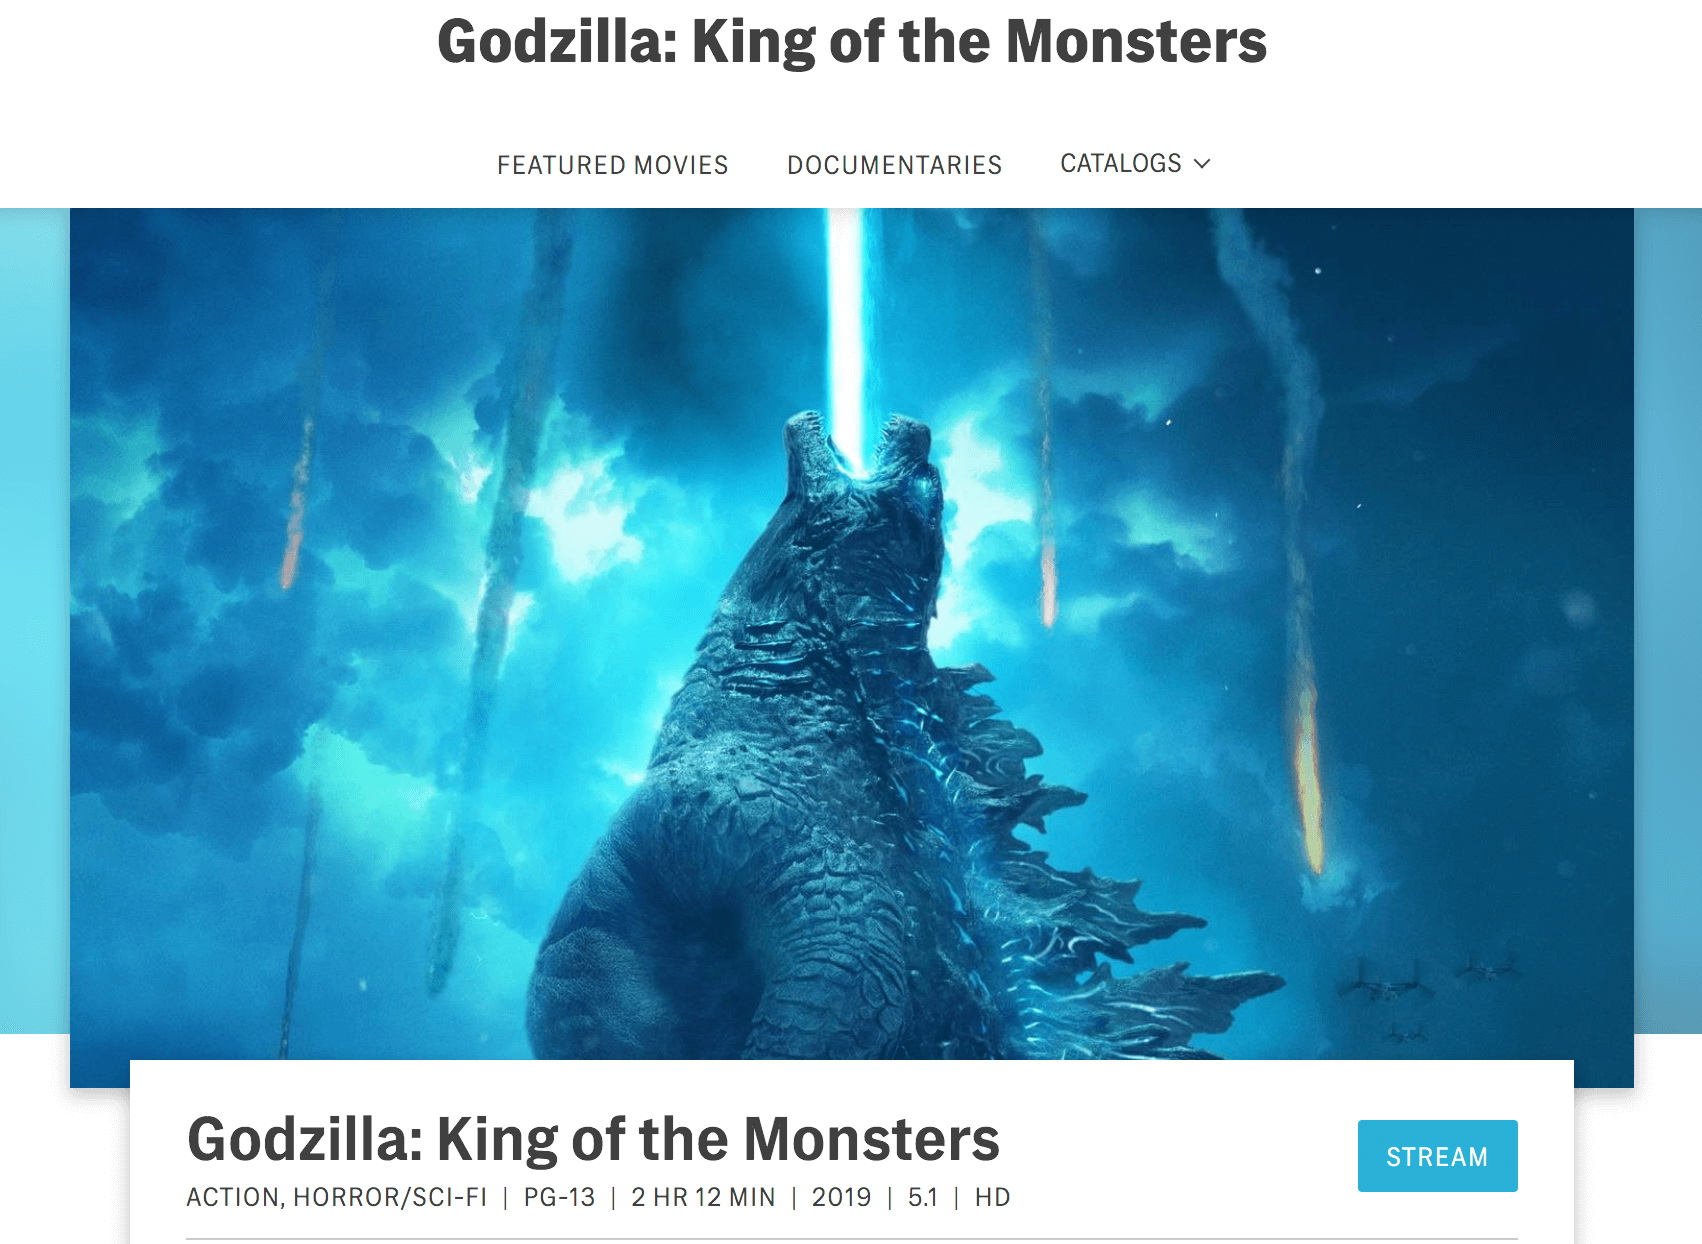  Watch-Godzilla-King-of-the-Monsters-hbomax  